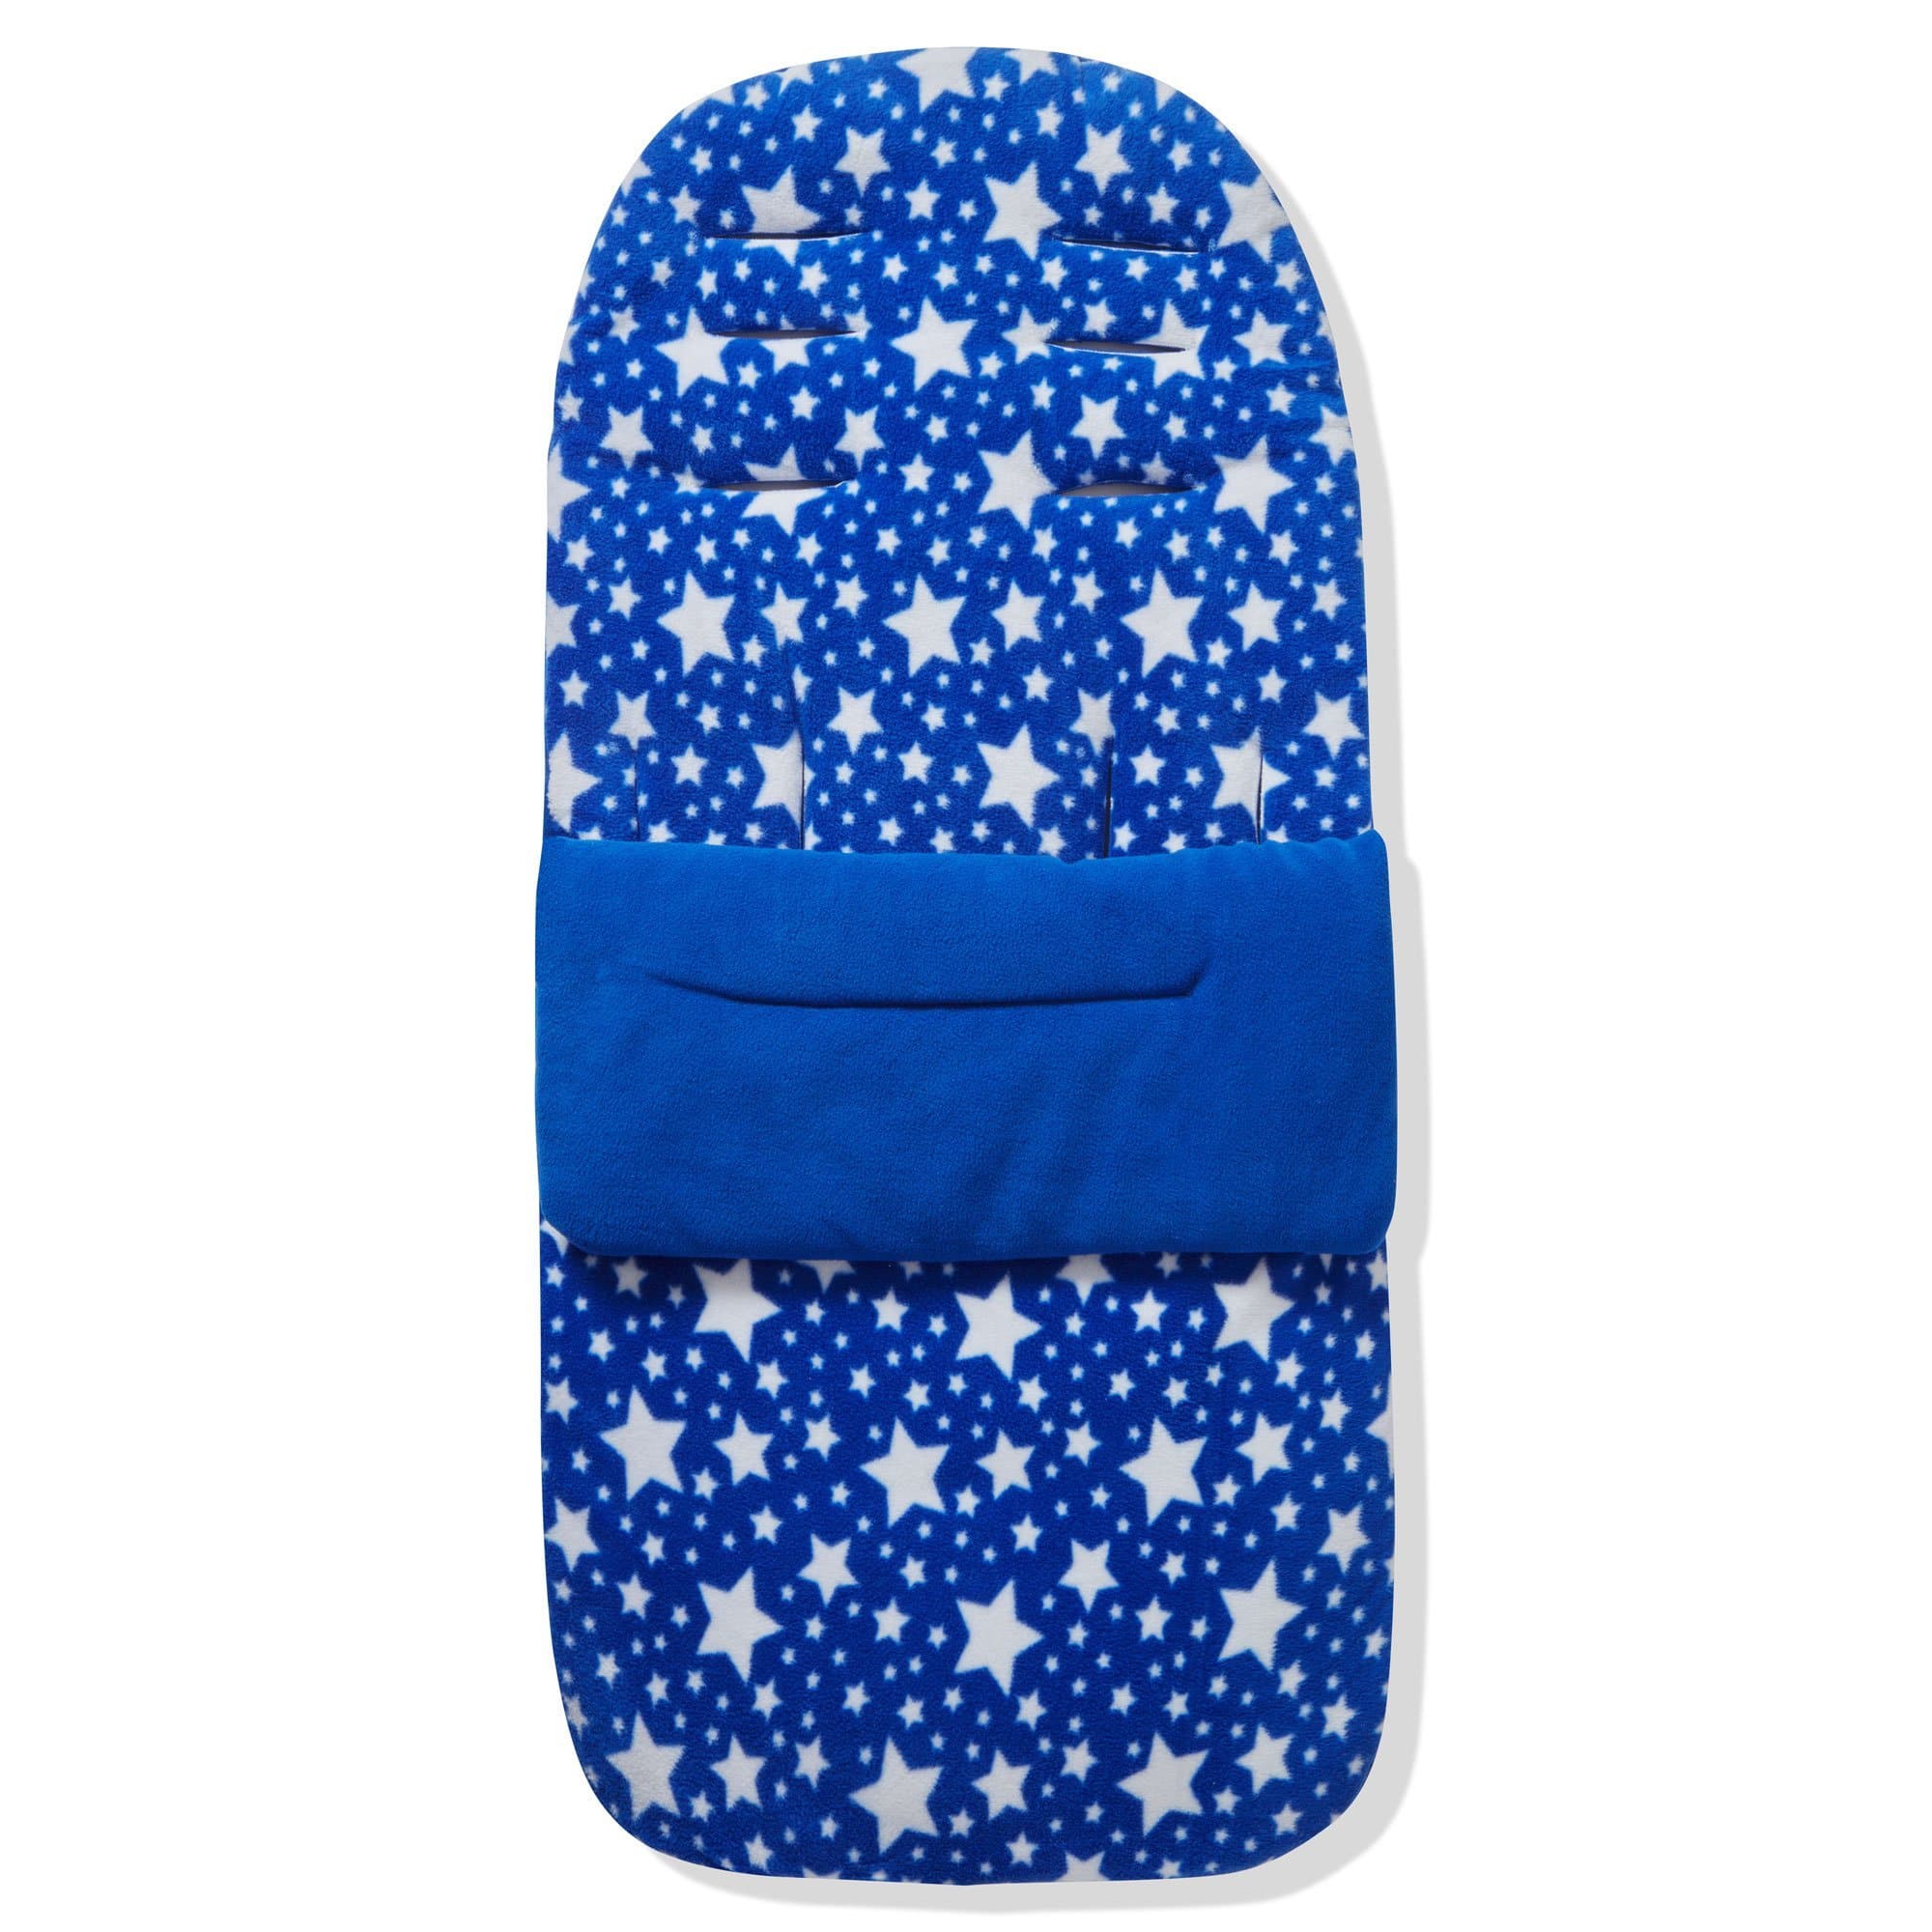 Fleece Footmuff / Cosy Toes Compatible with Silver Cross - Blue Star / Fits All Models | For Your Little One